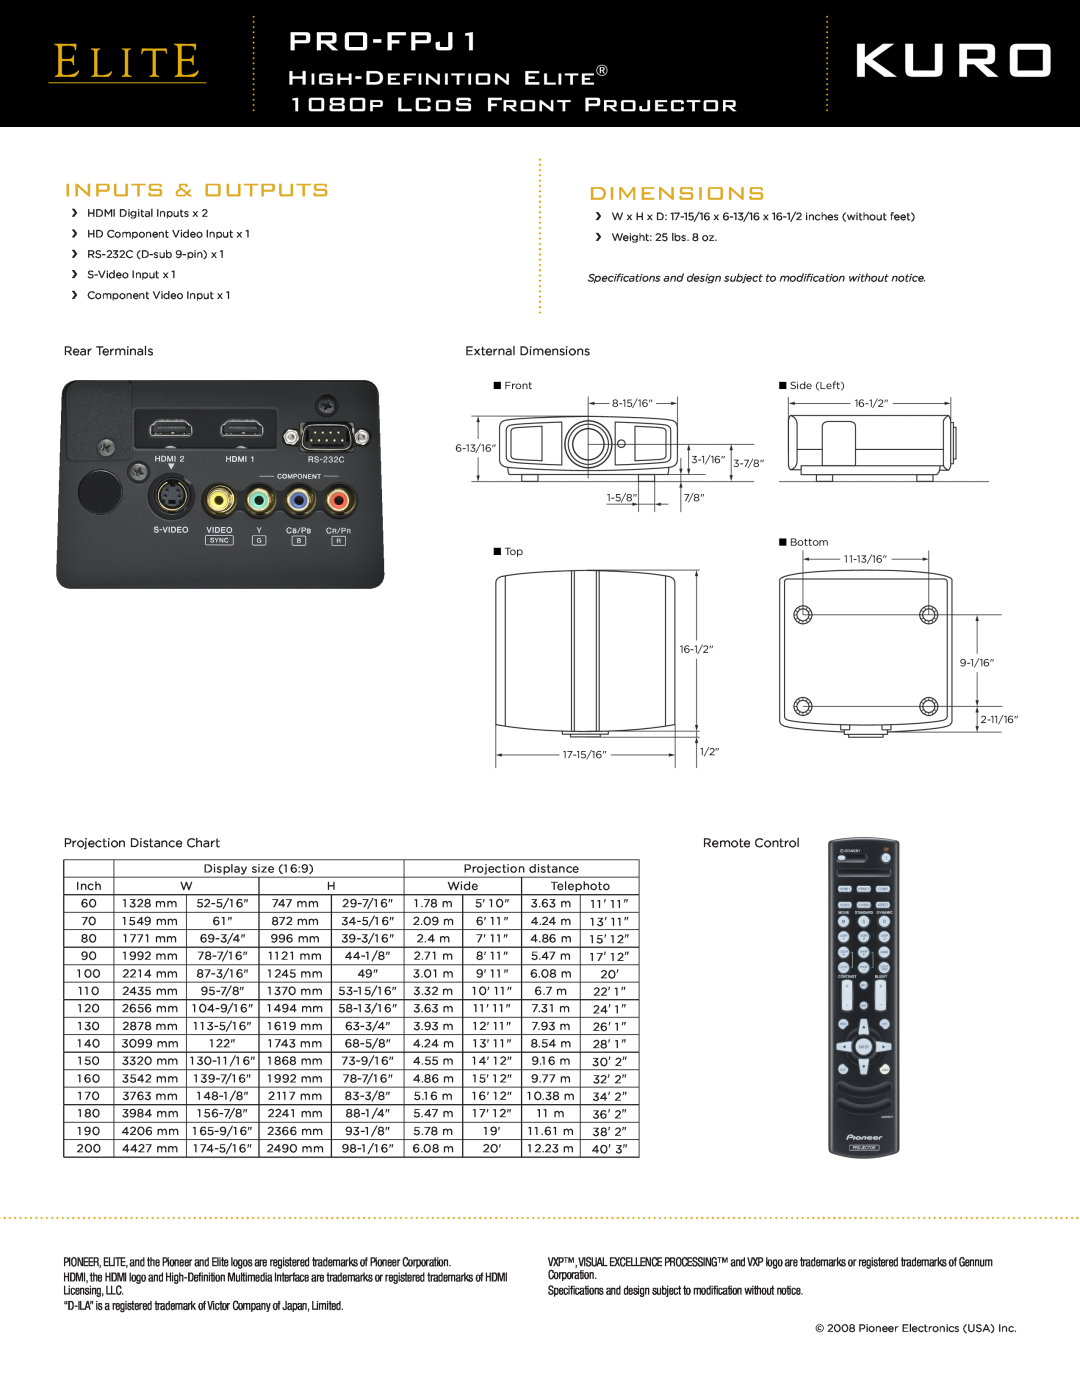 Elite PRO-FPJ1 manual Inputs & Outputs, Dimensions, HIGH-DEFINITION ELITE 1080P LCOS FRONT PROJECTOR 